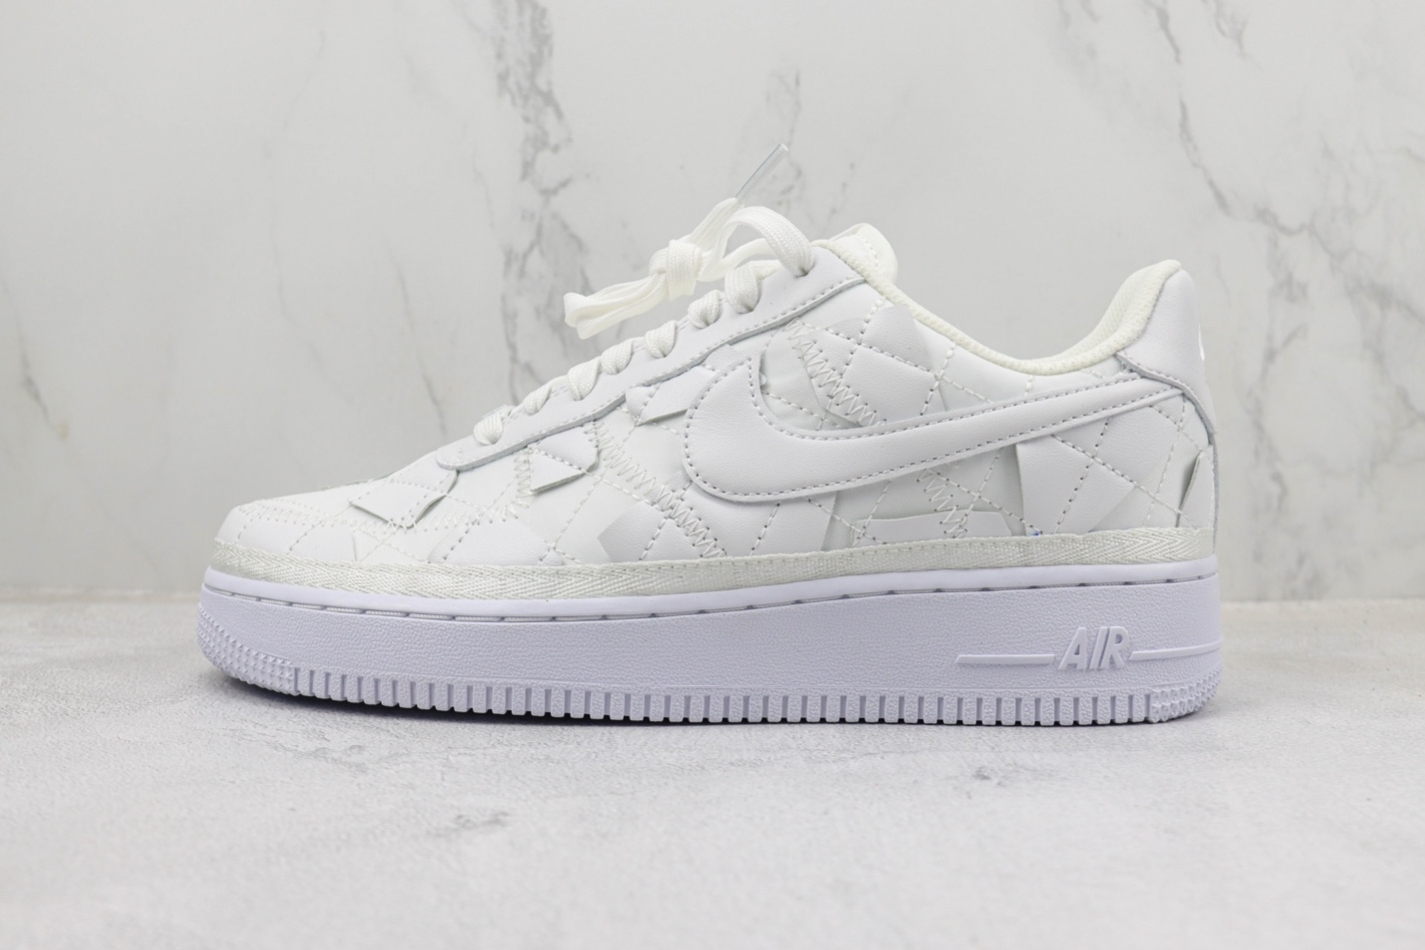 Nike Air Force 1 Low 'Billie Eilish White' DZ3674-100 - Iconic Style and Artist Collaboration